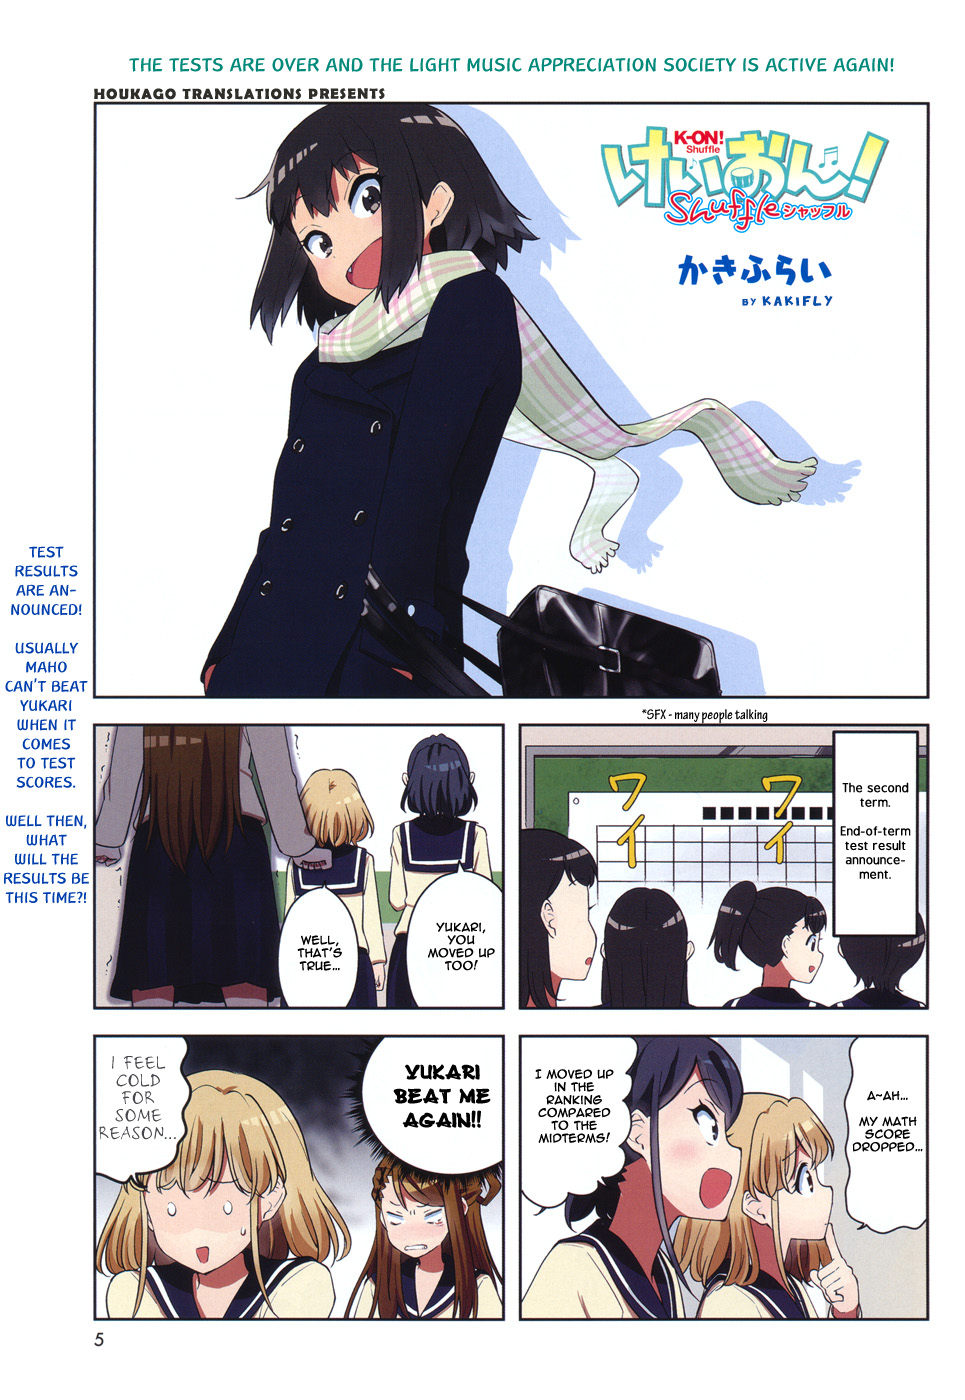 K-On! Shuffle - Page 1